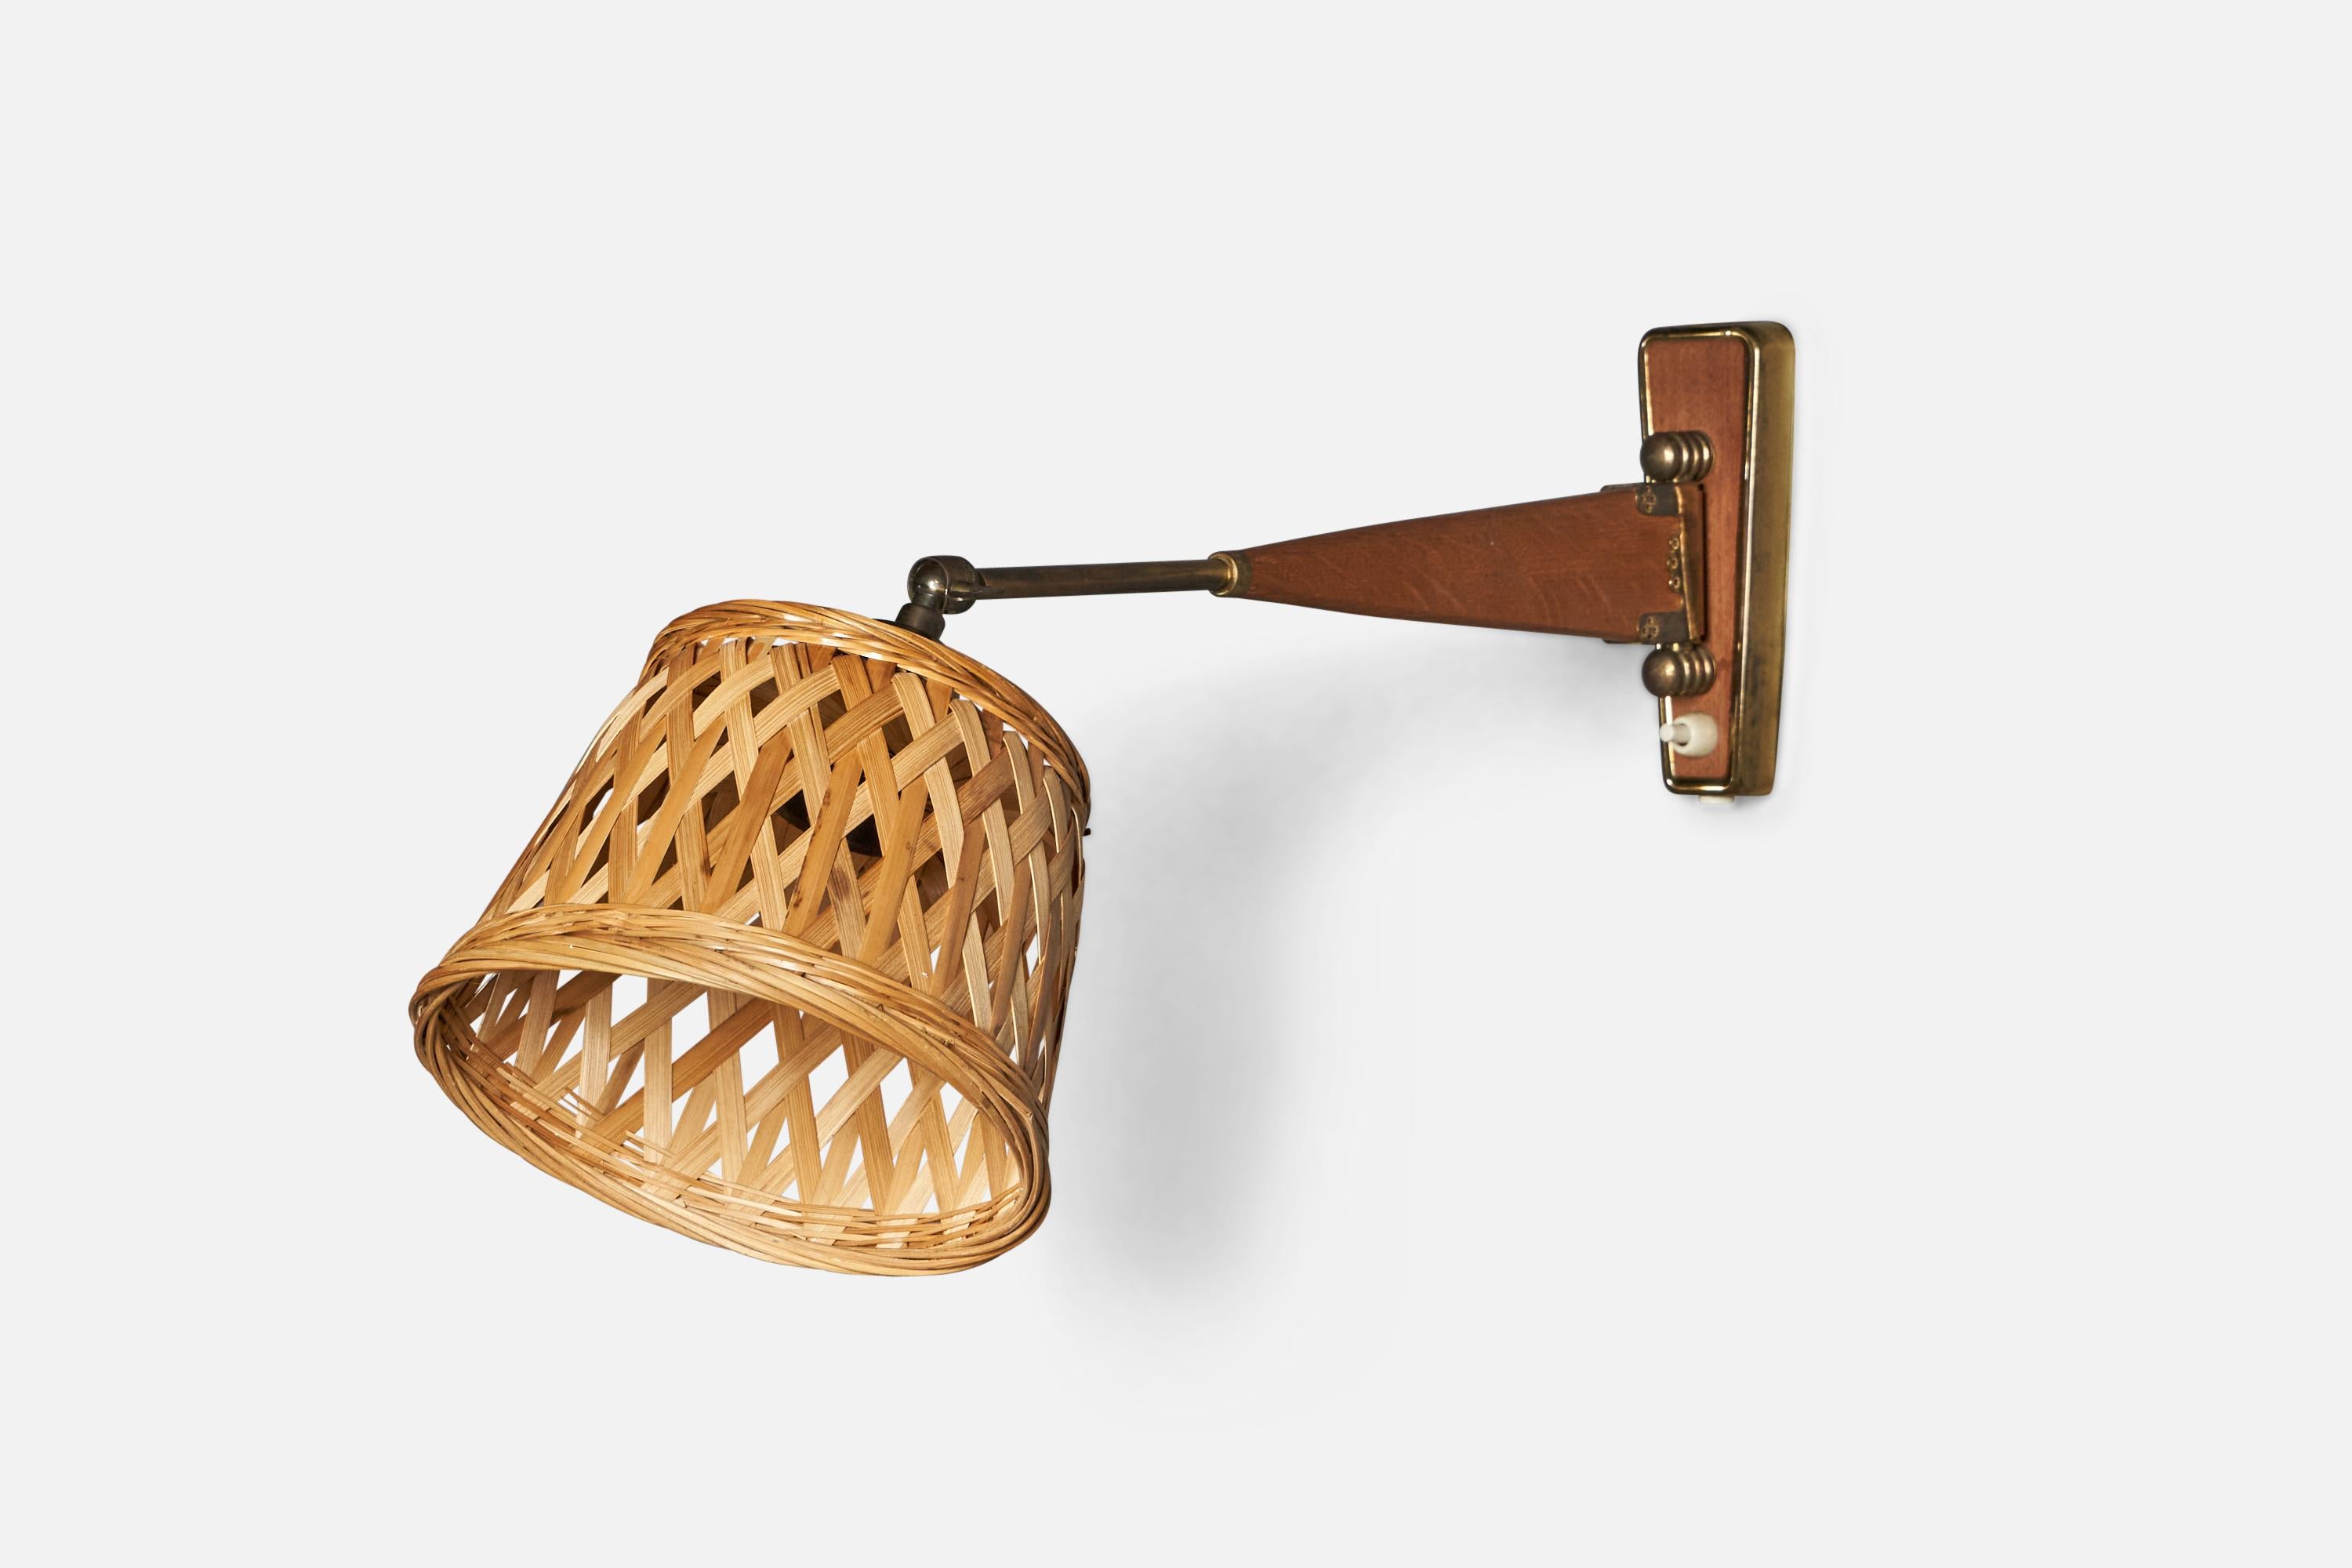 An adjustable brass, teak and rattan wall light designed and produced in Denmark, c. 1950s.

Overall Dimensions (inches): 10” H x 7.5” W x 20” D
Back Plate Dimensions (inches): 6” H x 2.25” W x 0.6” D
Bulb Specifications: E-26 Bulb
Number of